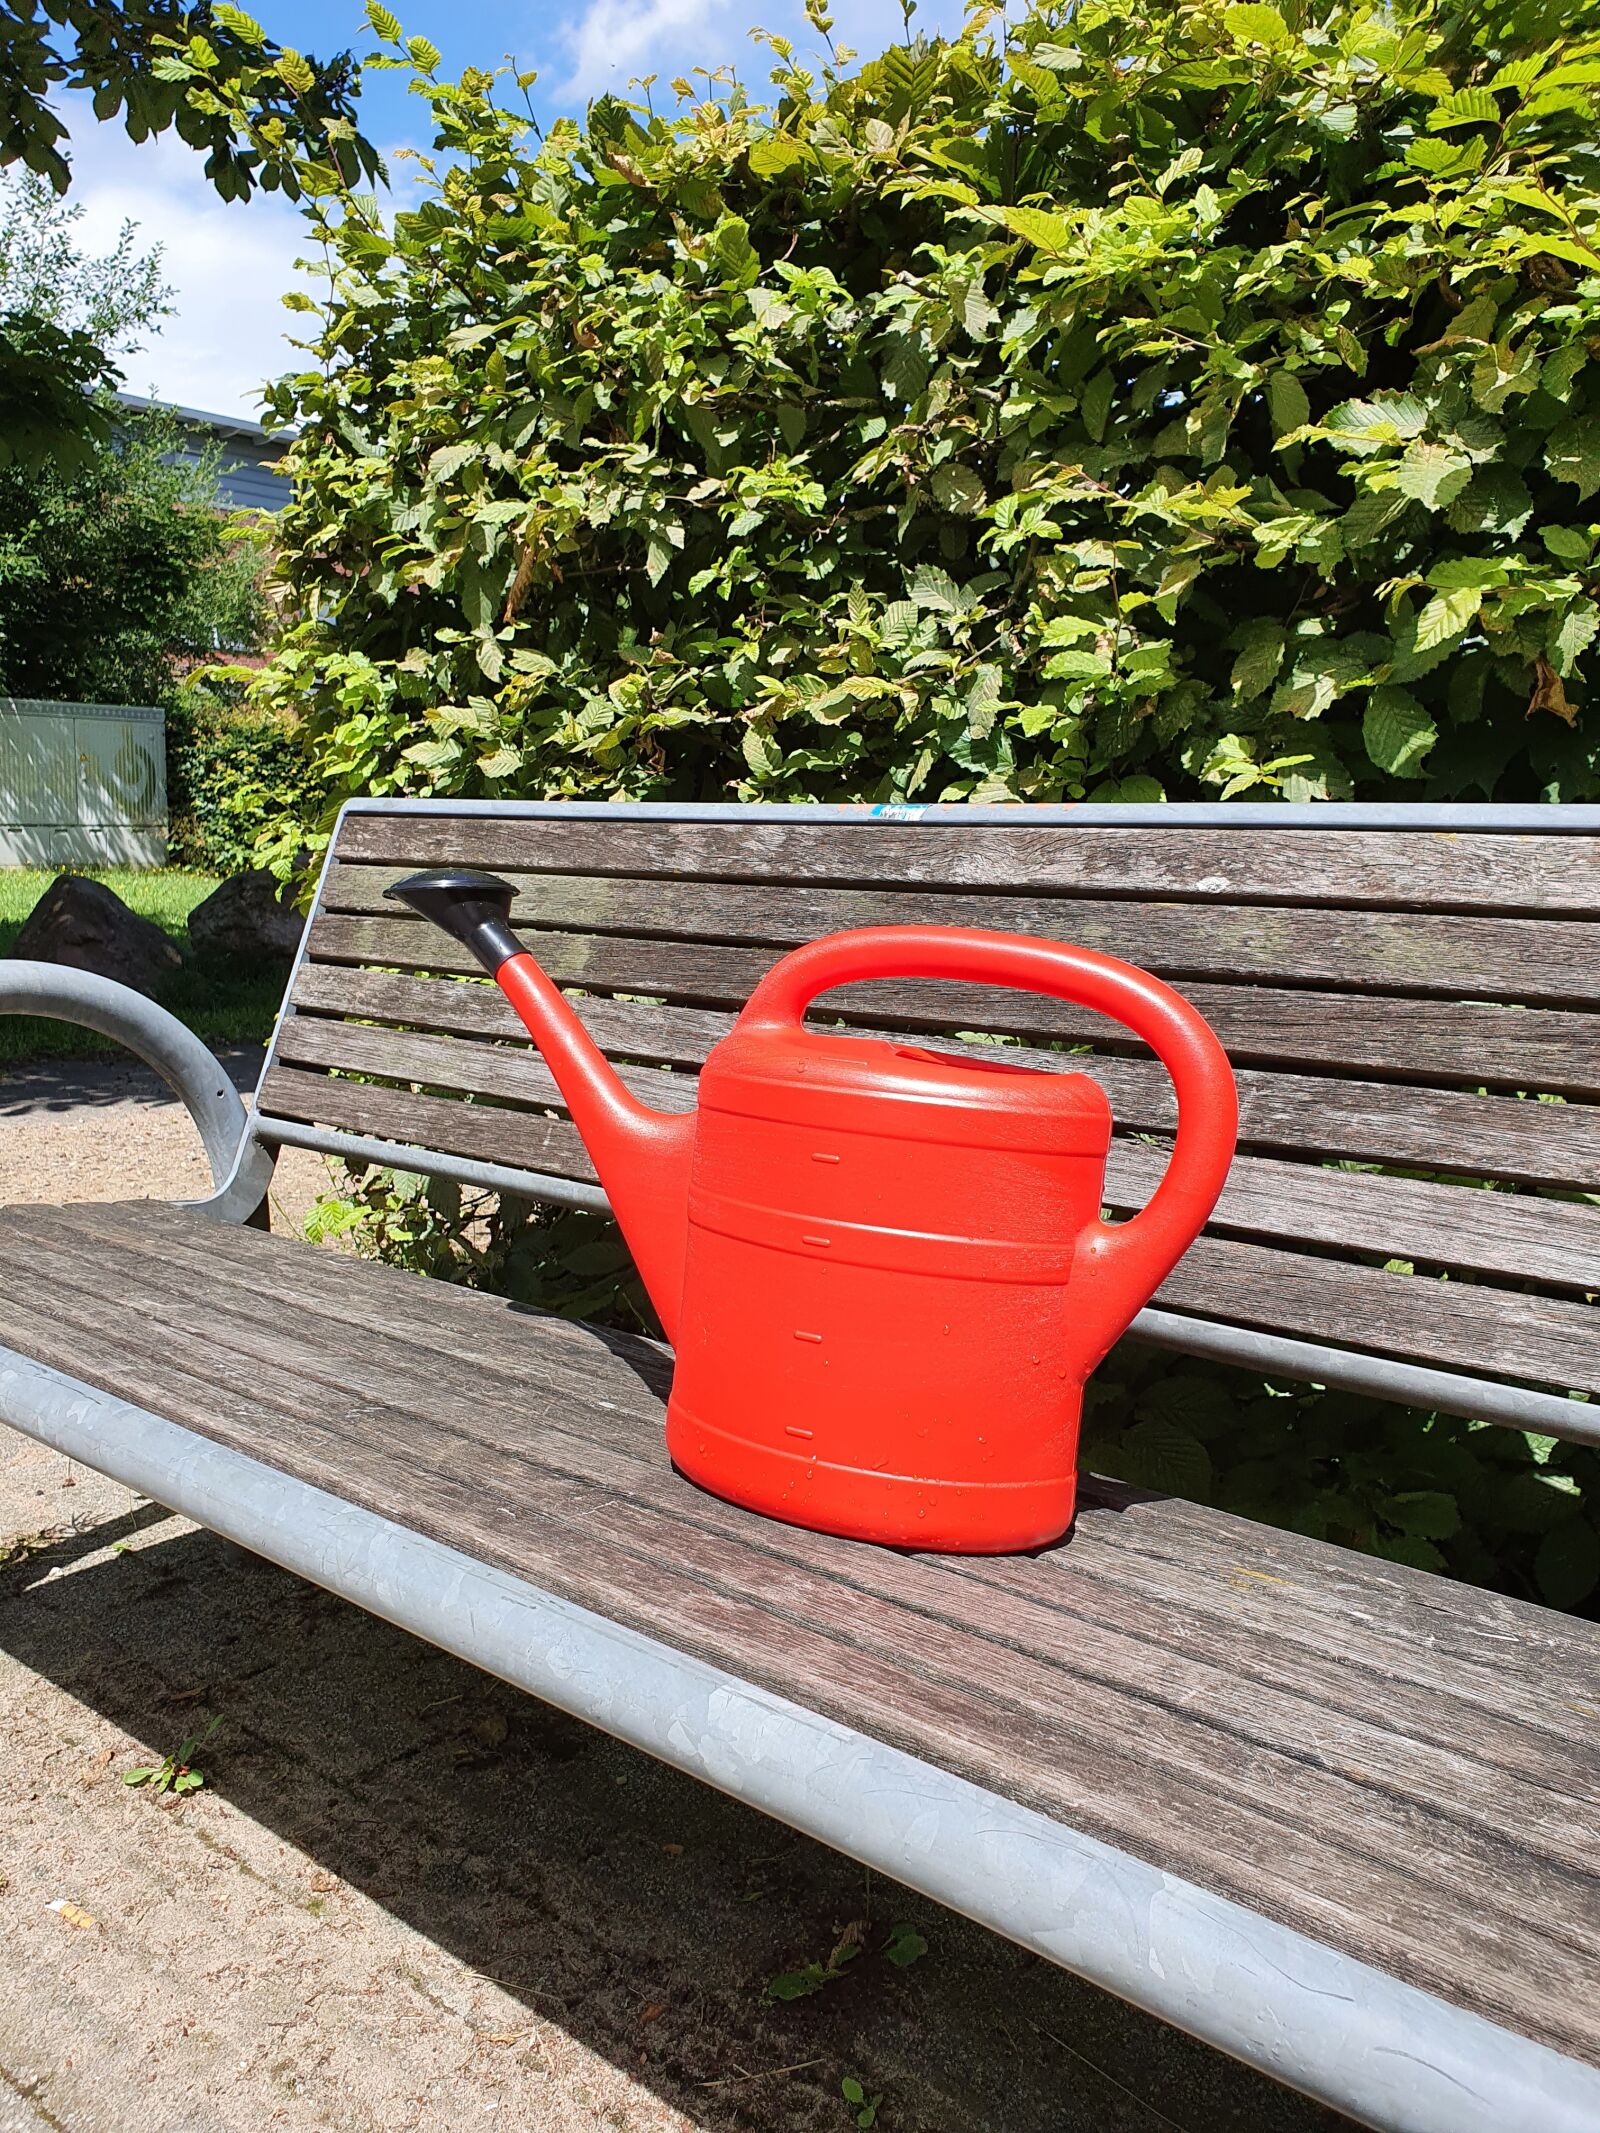 Samsung Galaxy S10+ sample photo. Watering can, red, policy photography